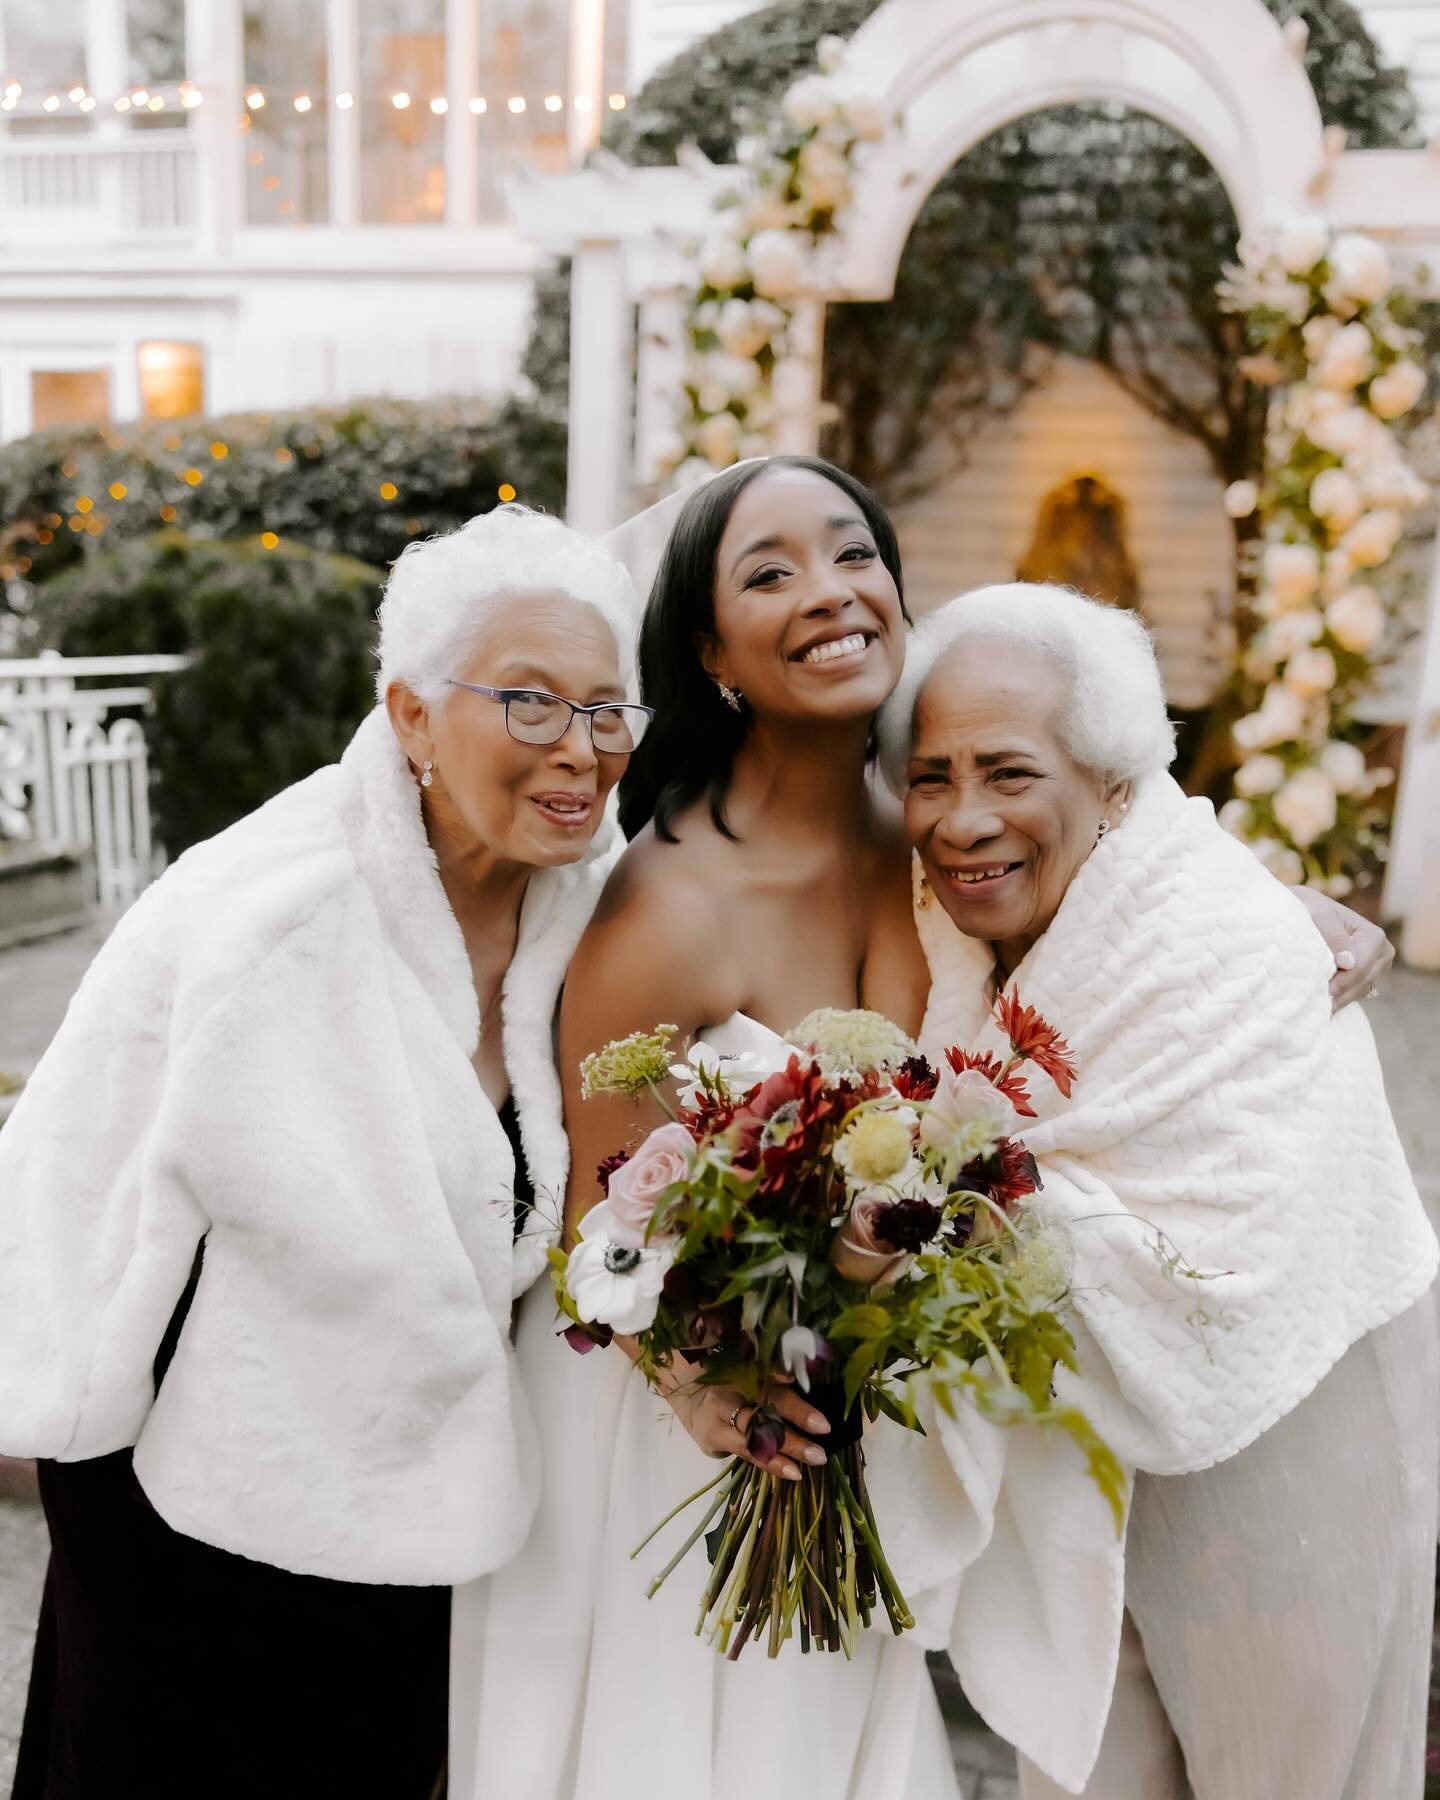 Three generations of love at Primrose Cottage! 💕Happy Mother&rsquo;s Day to all the amazing moms and grandmas who bring warmth and joy to our hearts. Celebrating special moments like these with the ones we cherish most. 🌸 #MothersDay #PrimroseCotta